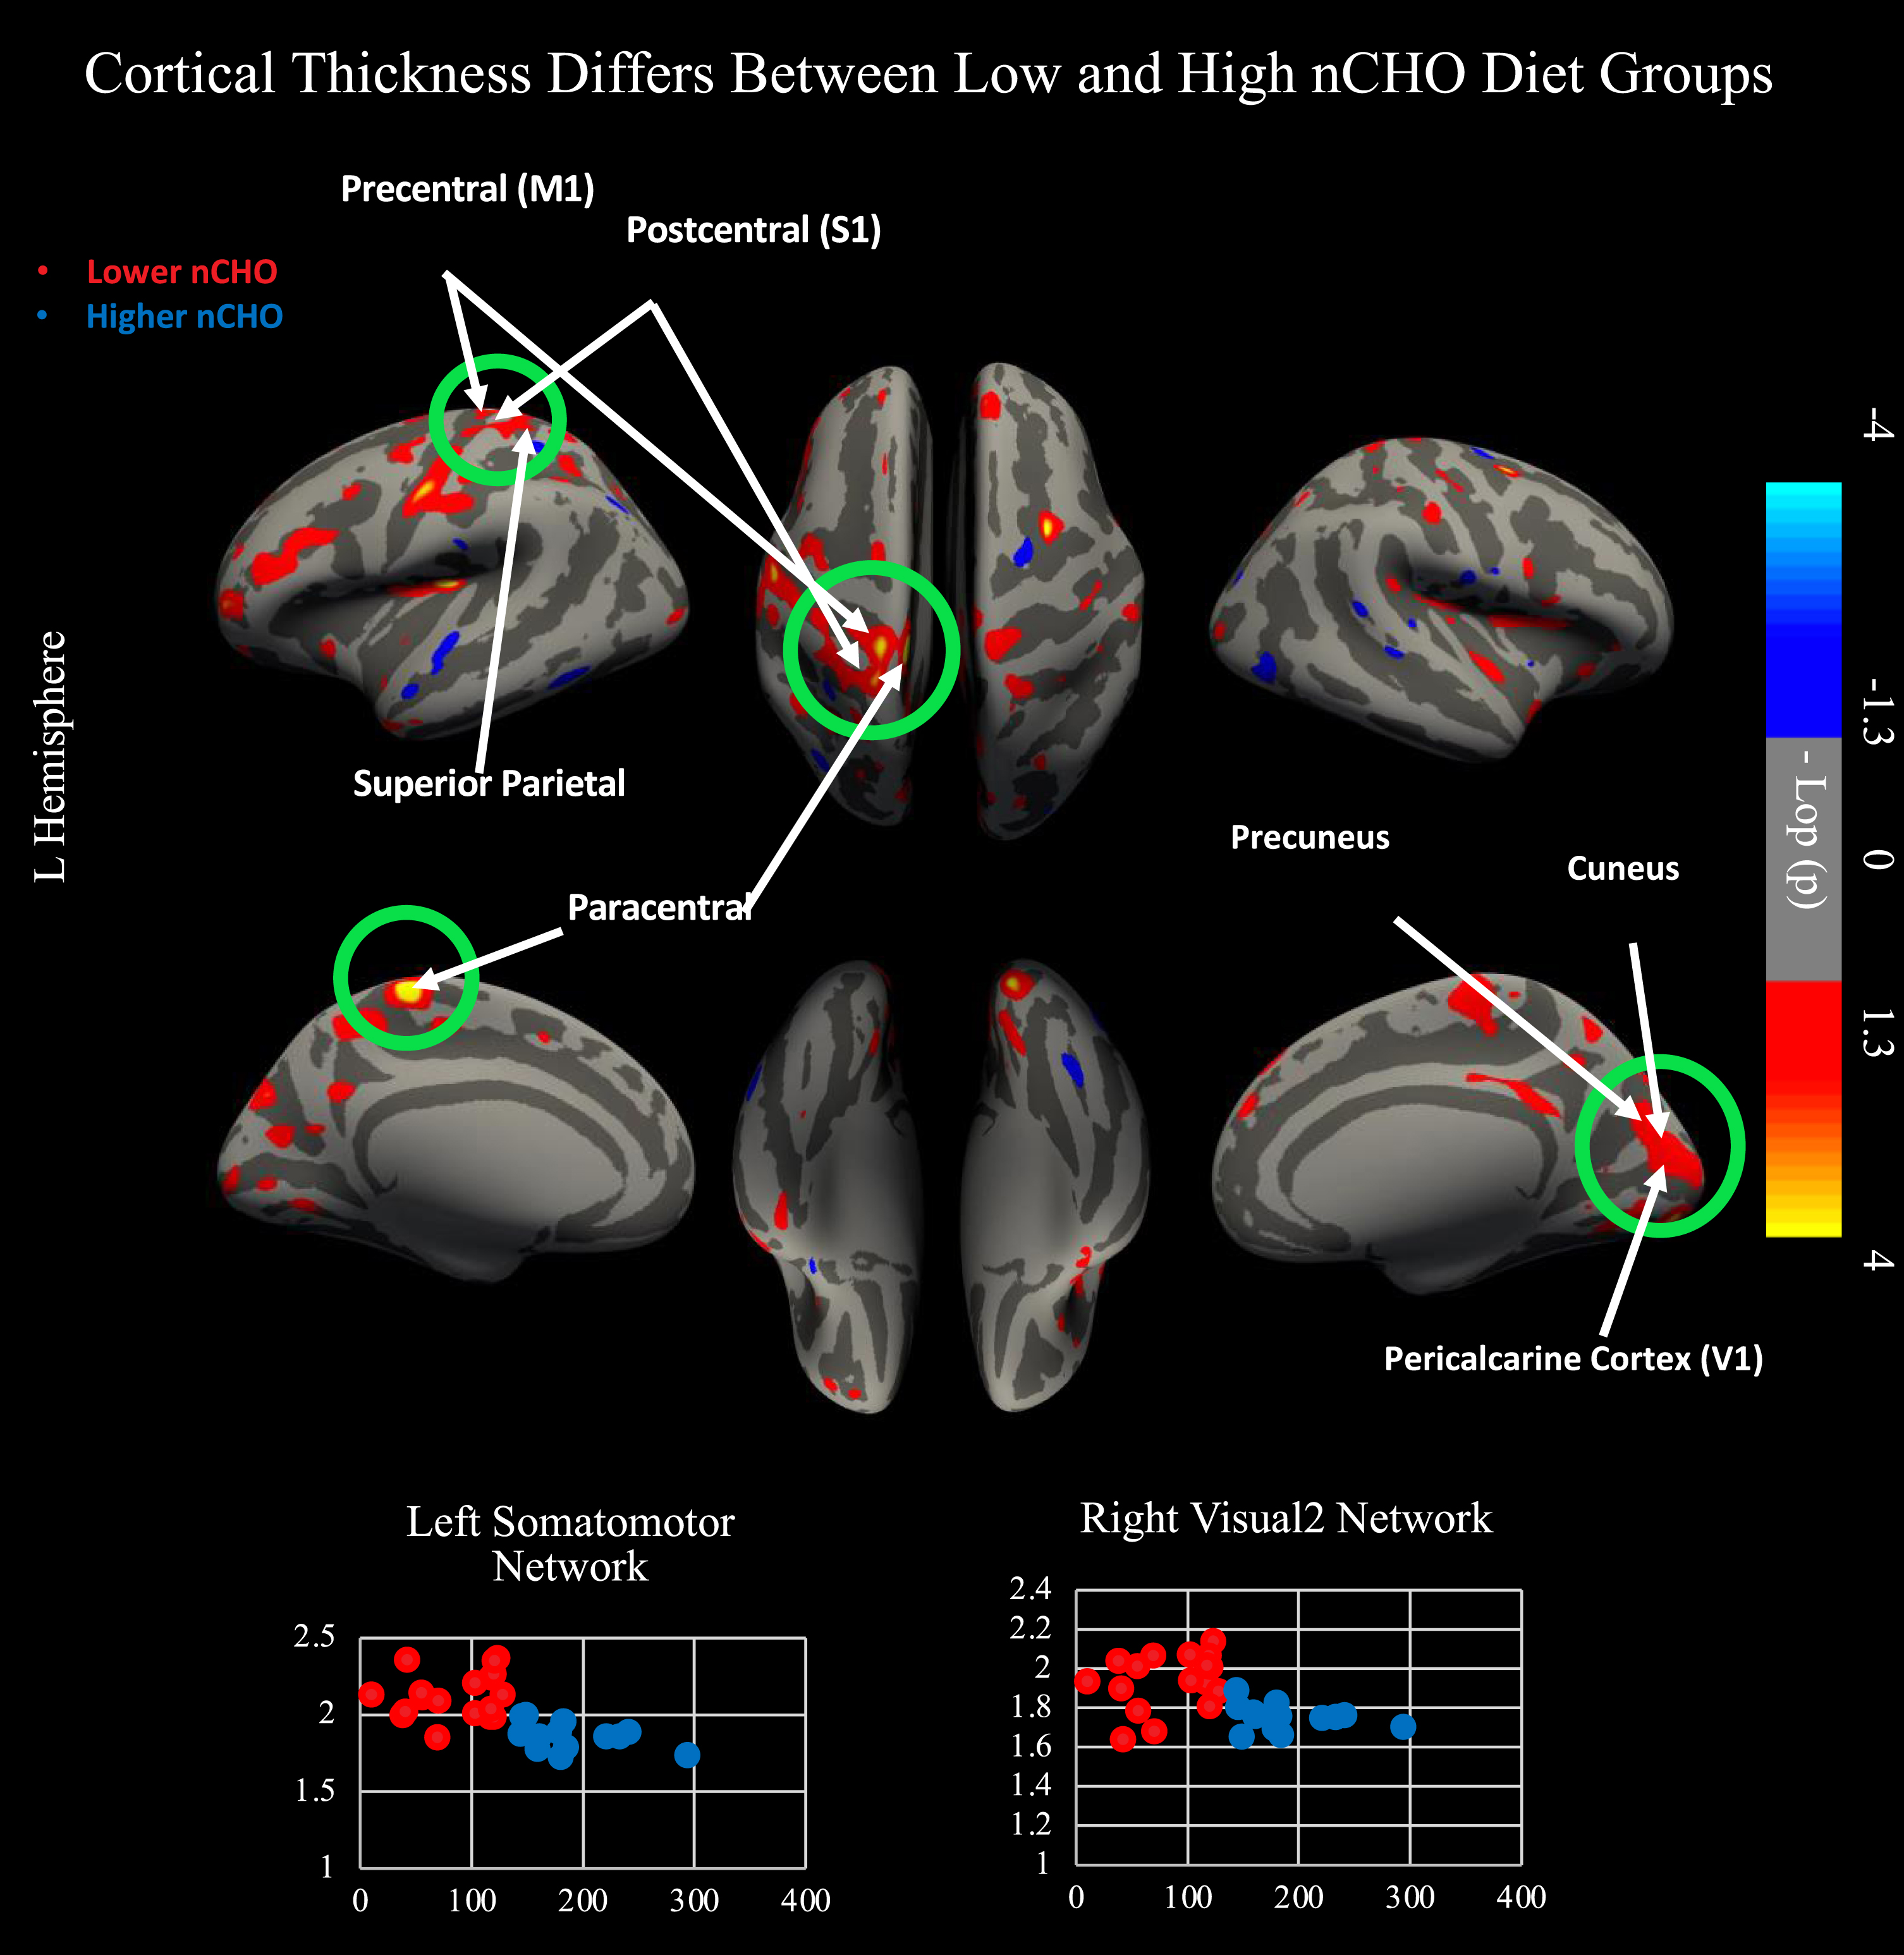 Results from two independent sample, two-tailed t-test comparing lower - higher net carbohydrate (nCHO) diet groups. Top of figure shows results from cortical surface analysis. Green circles indicate regions that survived correction for multiple comparisons using CWP <0.05. White arrows point to highlighted anatomical regions. Warmer colors represent voxels with significantly thicker cortex in the lower than higher nCHO diet group. Bottom of figure contains scatterplots displaying results extracted from the peak voxel in the network indicated. Lower nCHO individuals are plotted in red. Higher nCHO individuals are plotted in blue. Regions plotted include the left primary motor cortex (4) within the somatomotor network and V2 within the right secondary visual network. Regions significant after CWP correction include primary sensory cortex (1, 2, 3a, 3b), primary motor cortex, area 5 m, primary visual cortex (V1), second, third, and sixth visual areas (V2, V3, V6), and the dorsal transitional visual area (DVT). Network and regional definitions were taken from the Human Connectome Project Multi-Modal Parcellation (HCP-MMP) Atlas.